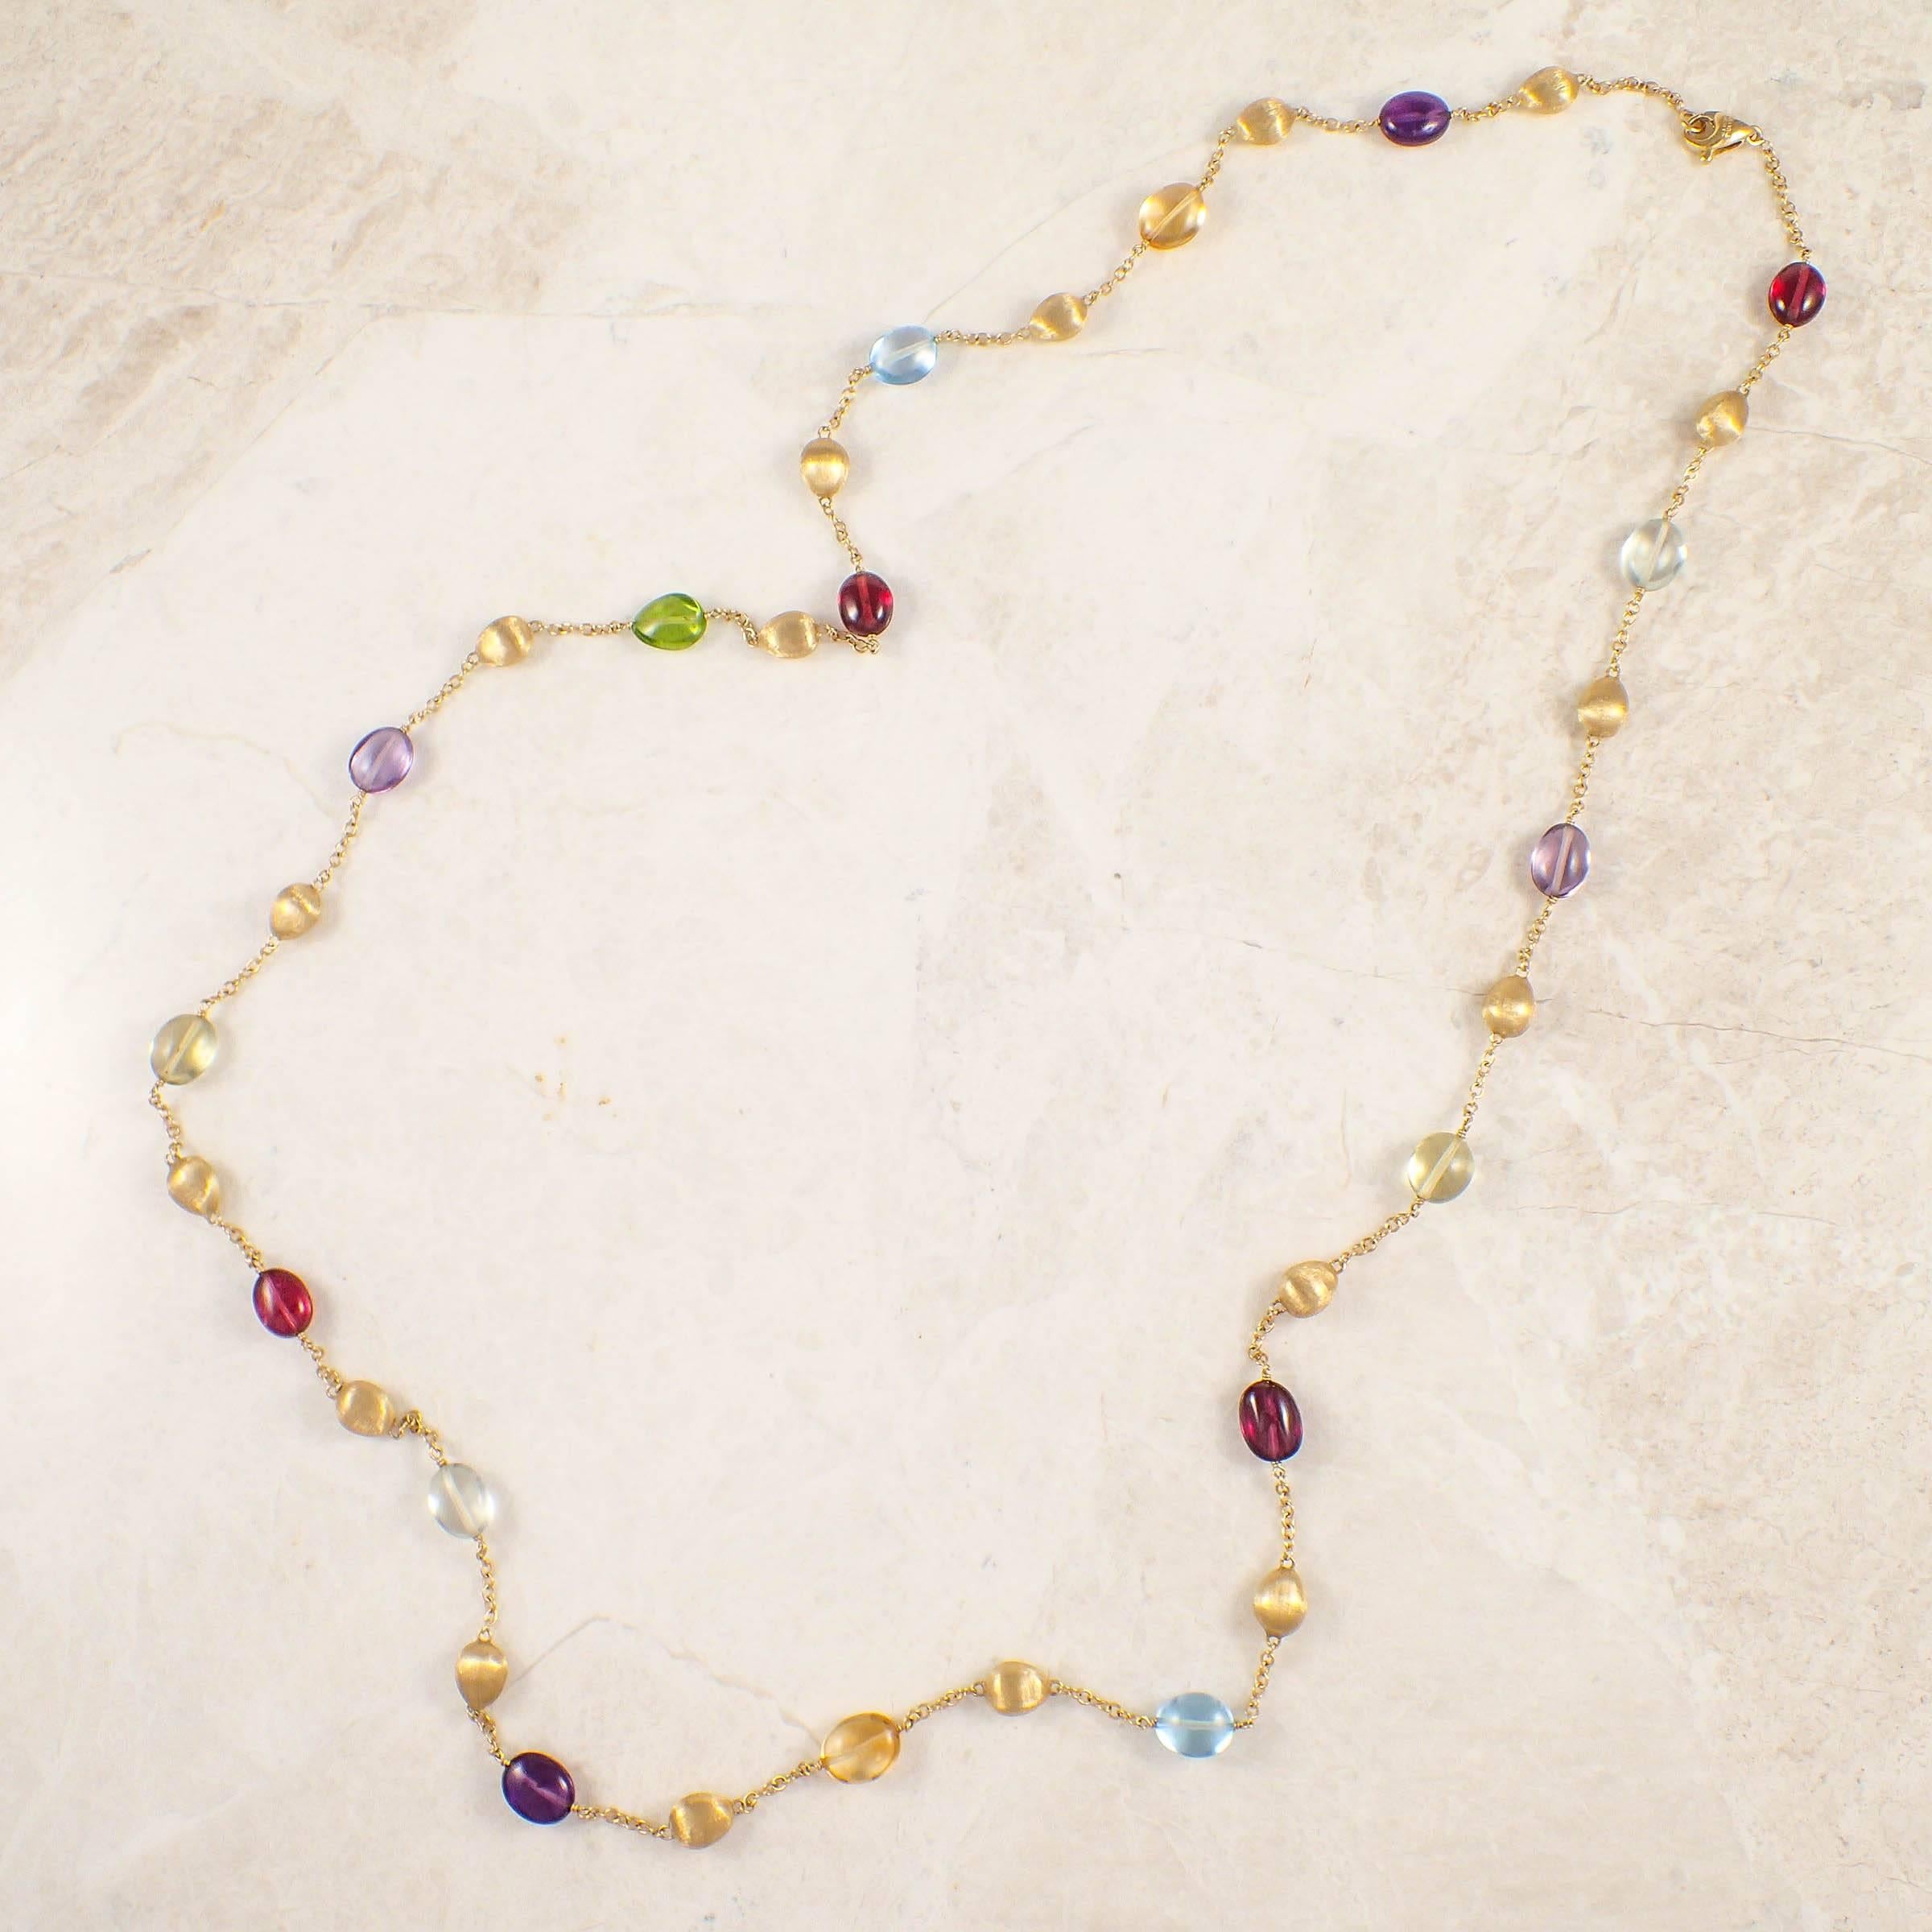 Women's Semi-Precious Stone Gold Necklace and Earring Set